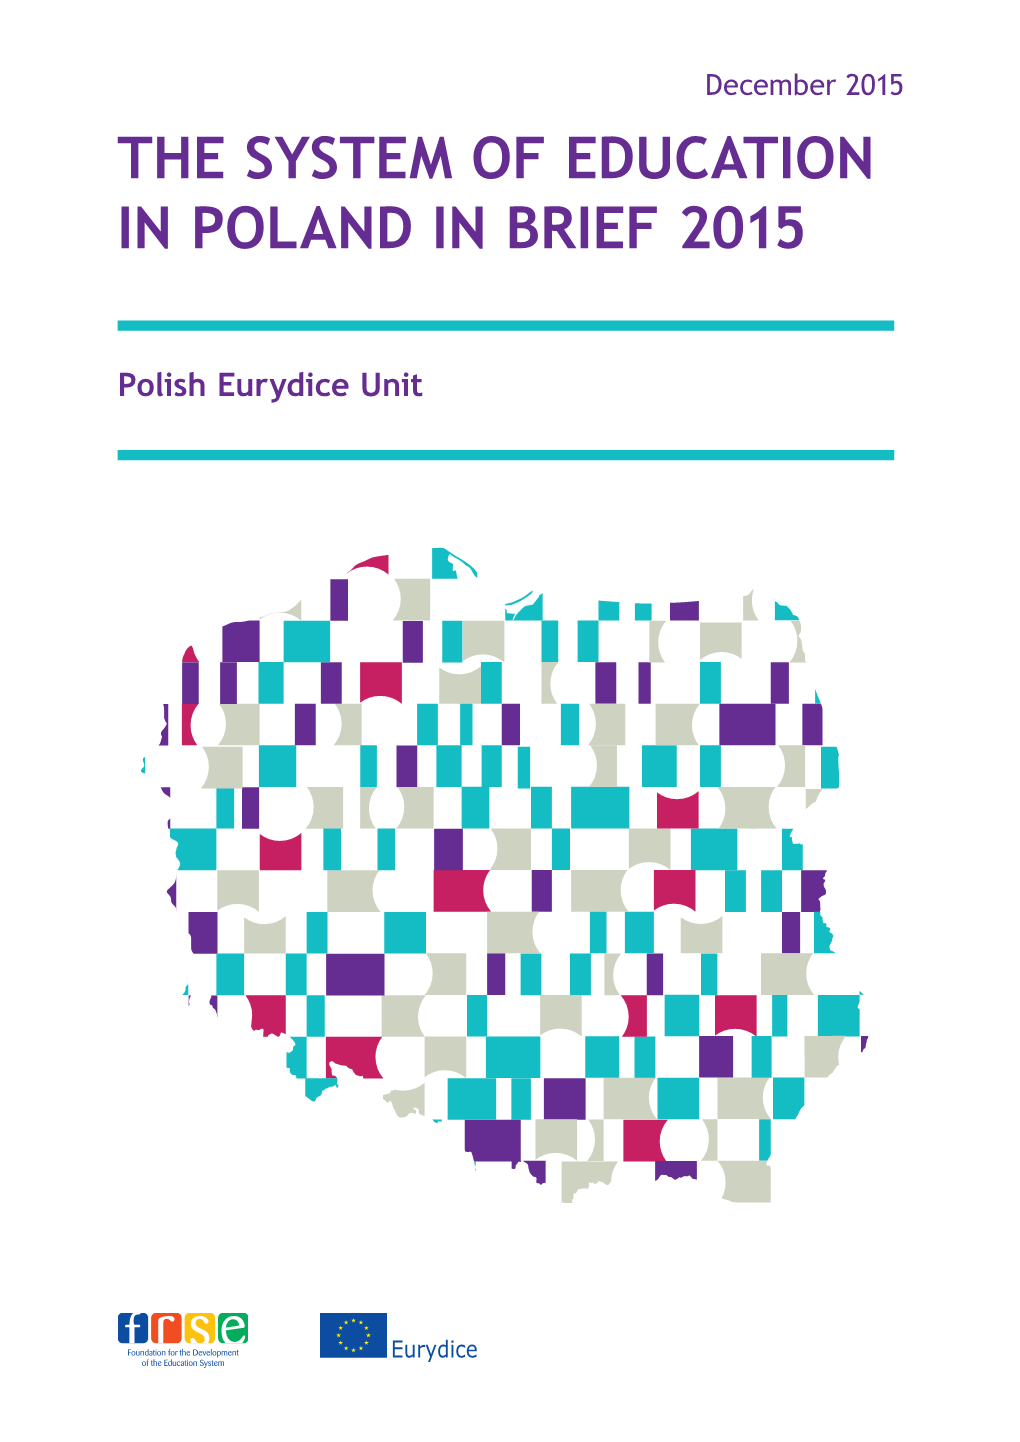 The System of Education in Poland in Brief 2015